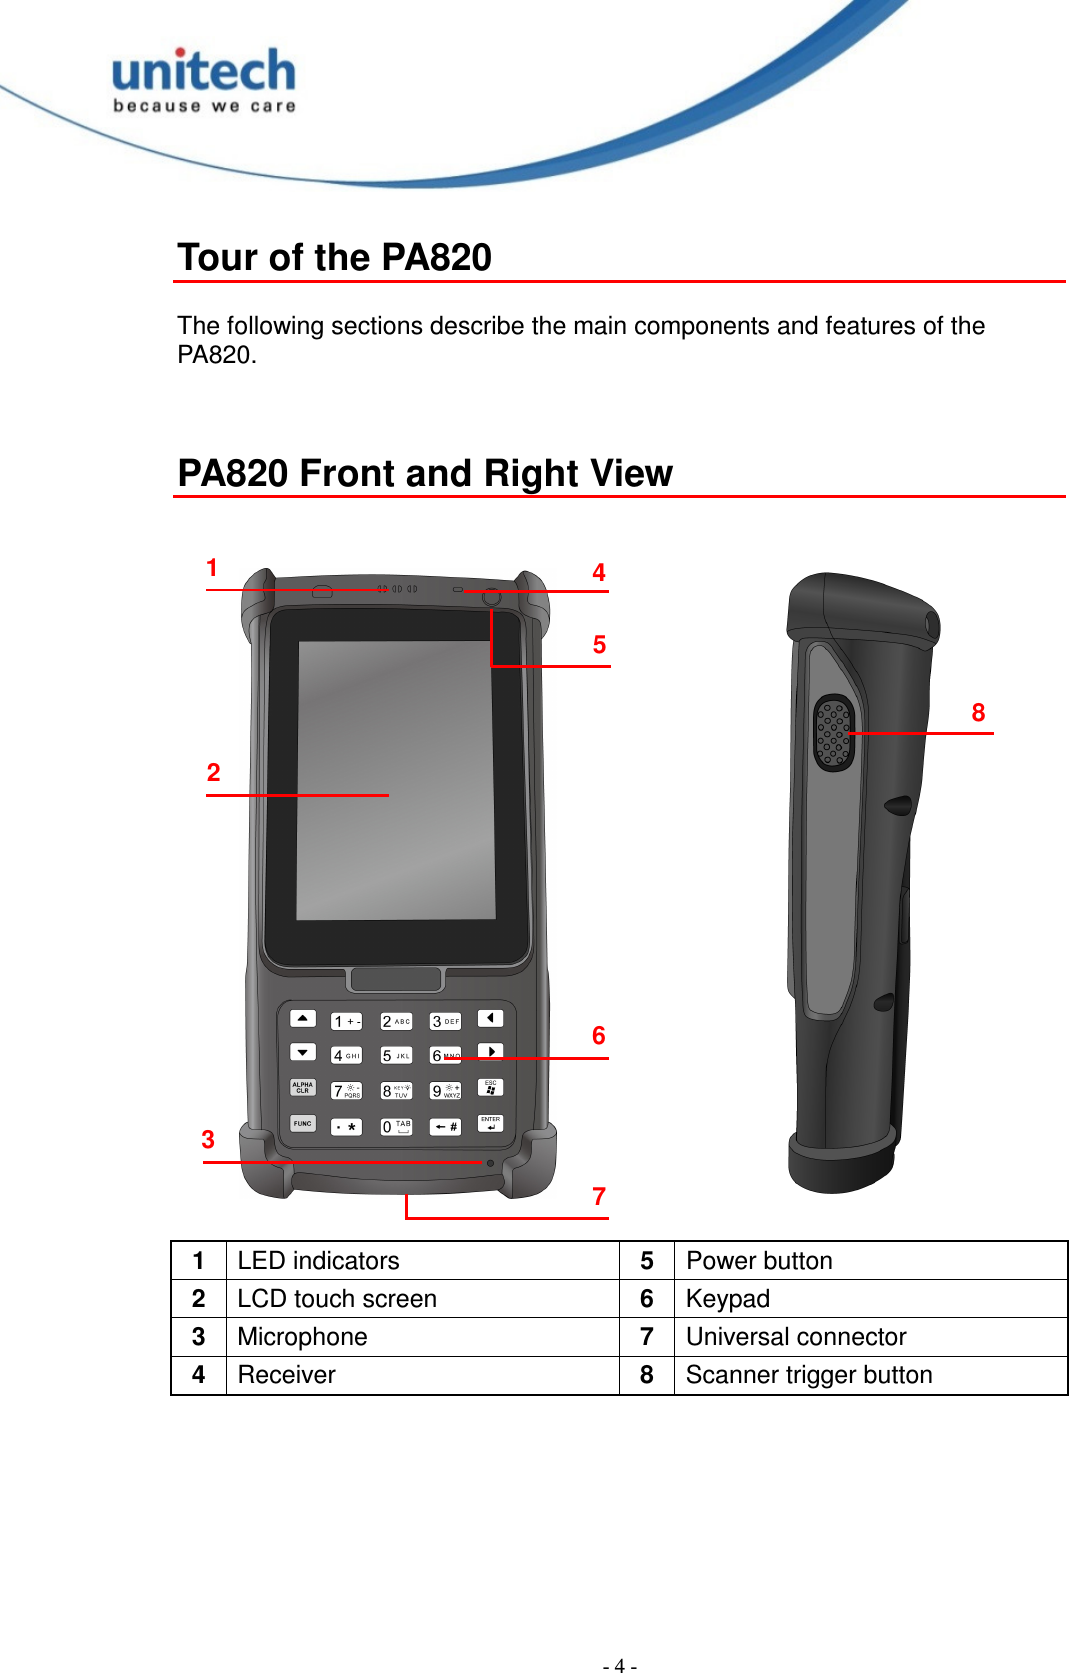  - 4 - Tour of the PA820  The following sections describe the main components and features of the PA820.   PA820 Front and Right View                              1  LED indicators  5  Power button 2  LCD touch screen  6  Keypad 3  Microphone  7  Universal connector 4  Receiver  8  Scanner trigger button  1 2 3 4 6 7 5 8 